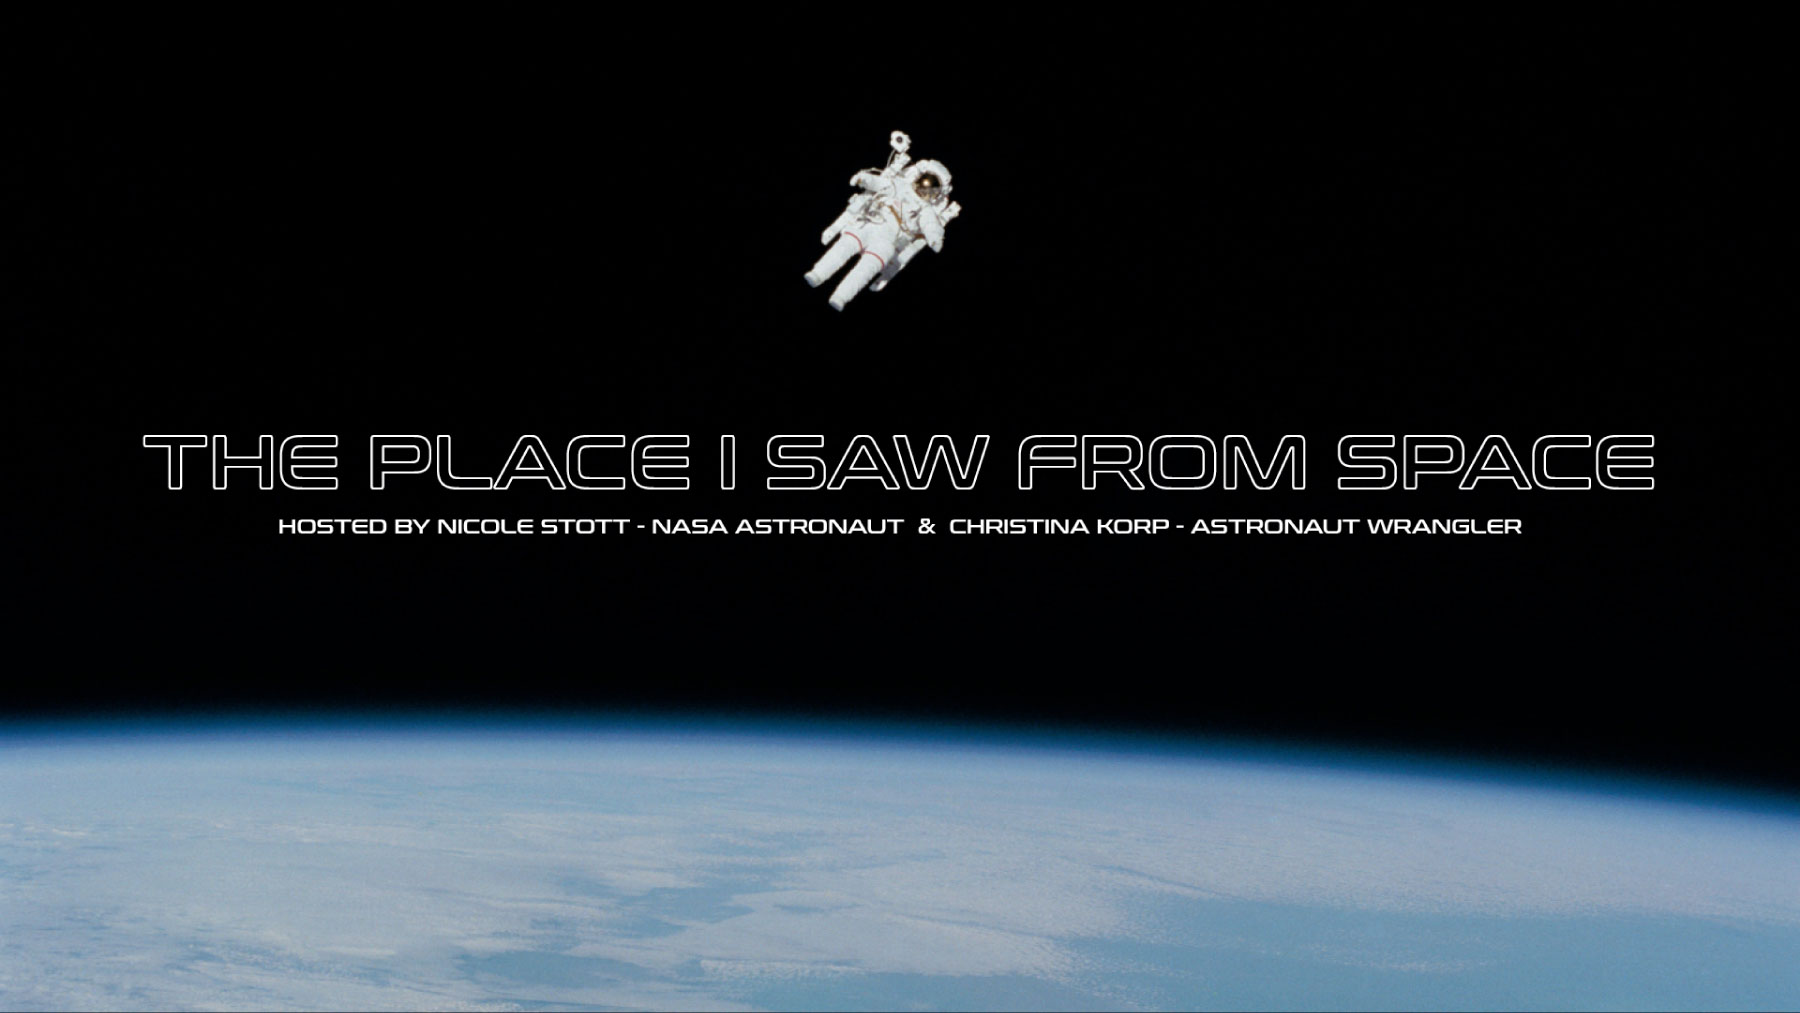 The place I saw from space art card, an astronaut floating above the earth